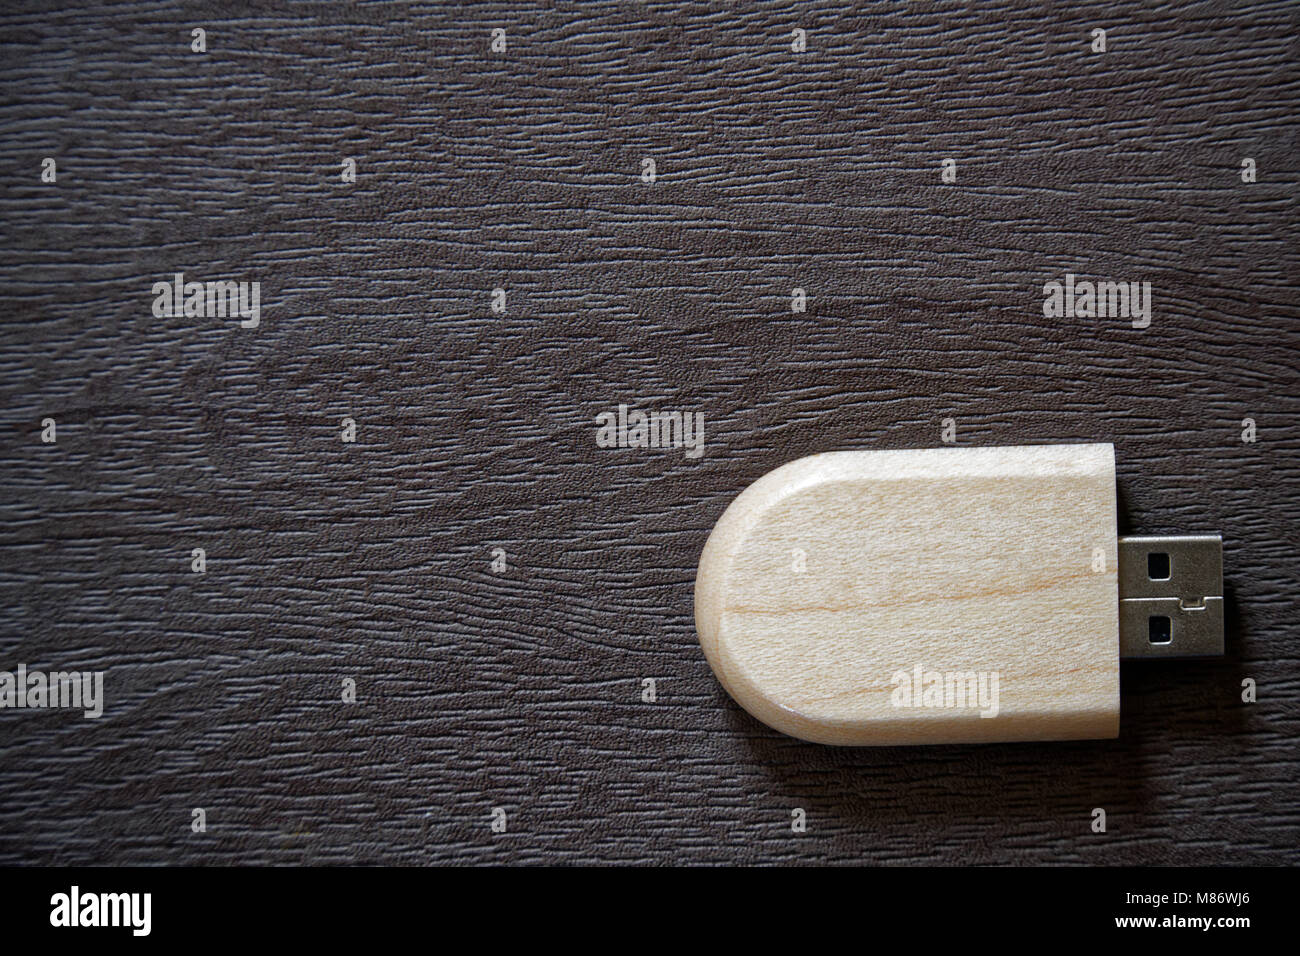 Usb Flash Drive With Wooden Surface On Desk For Usb Port Plug In